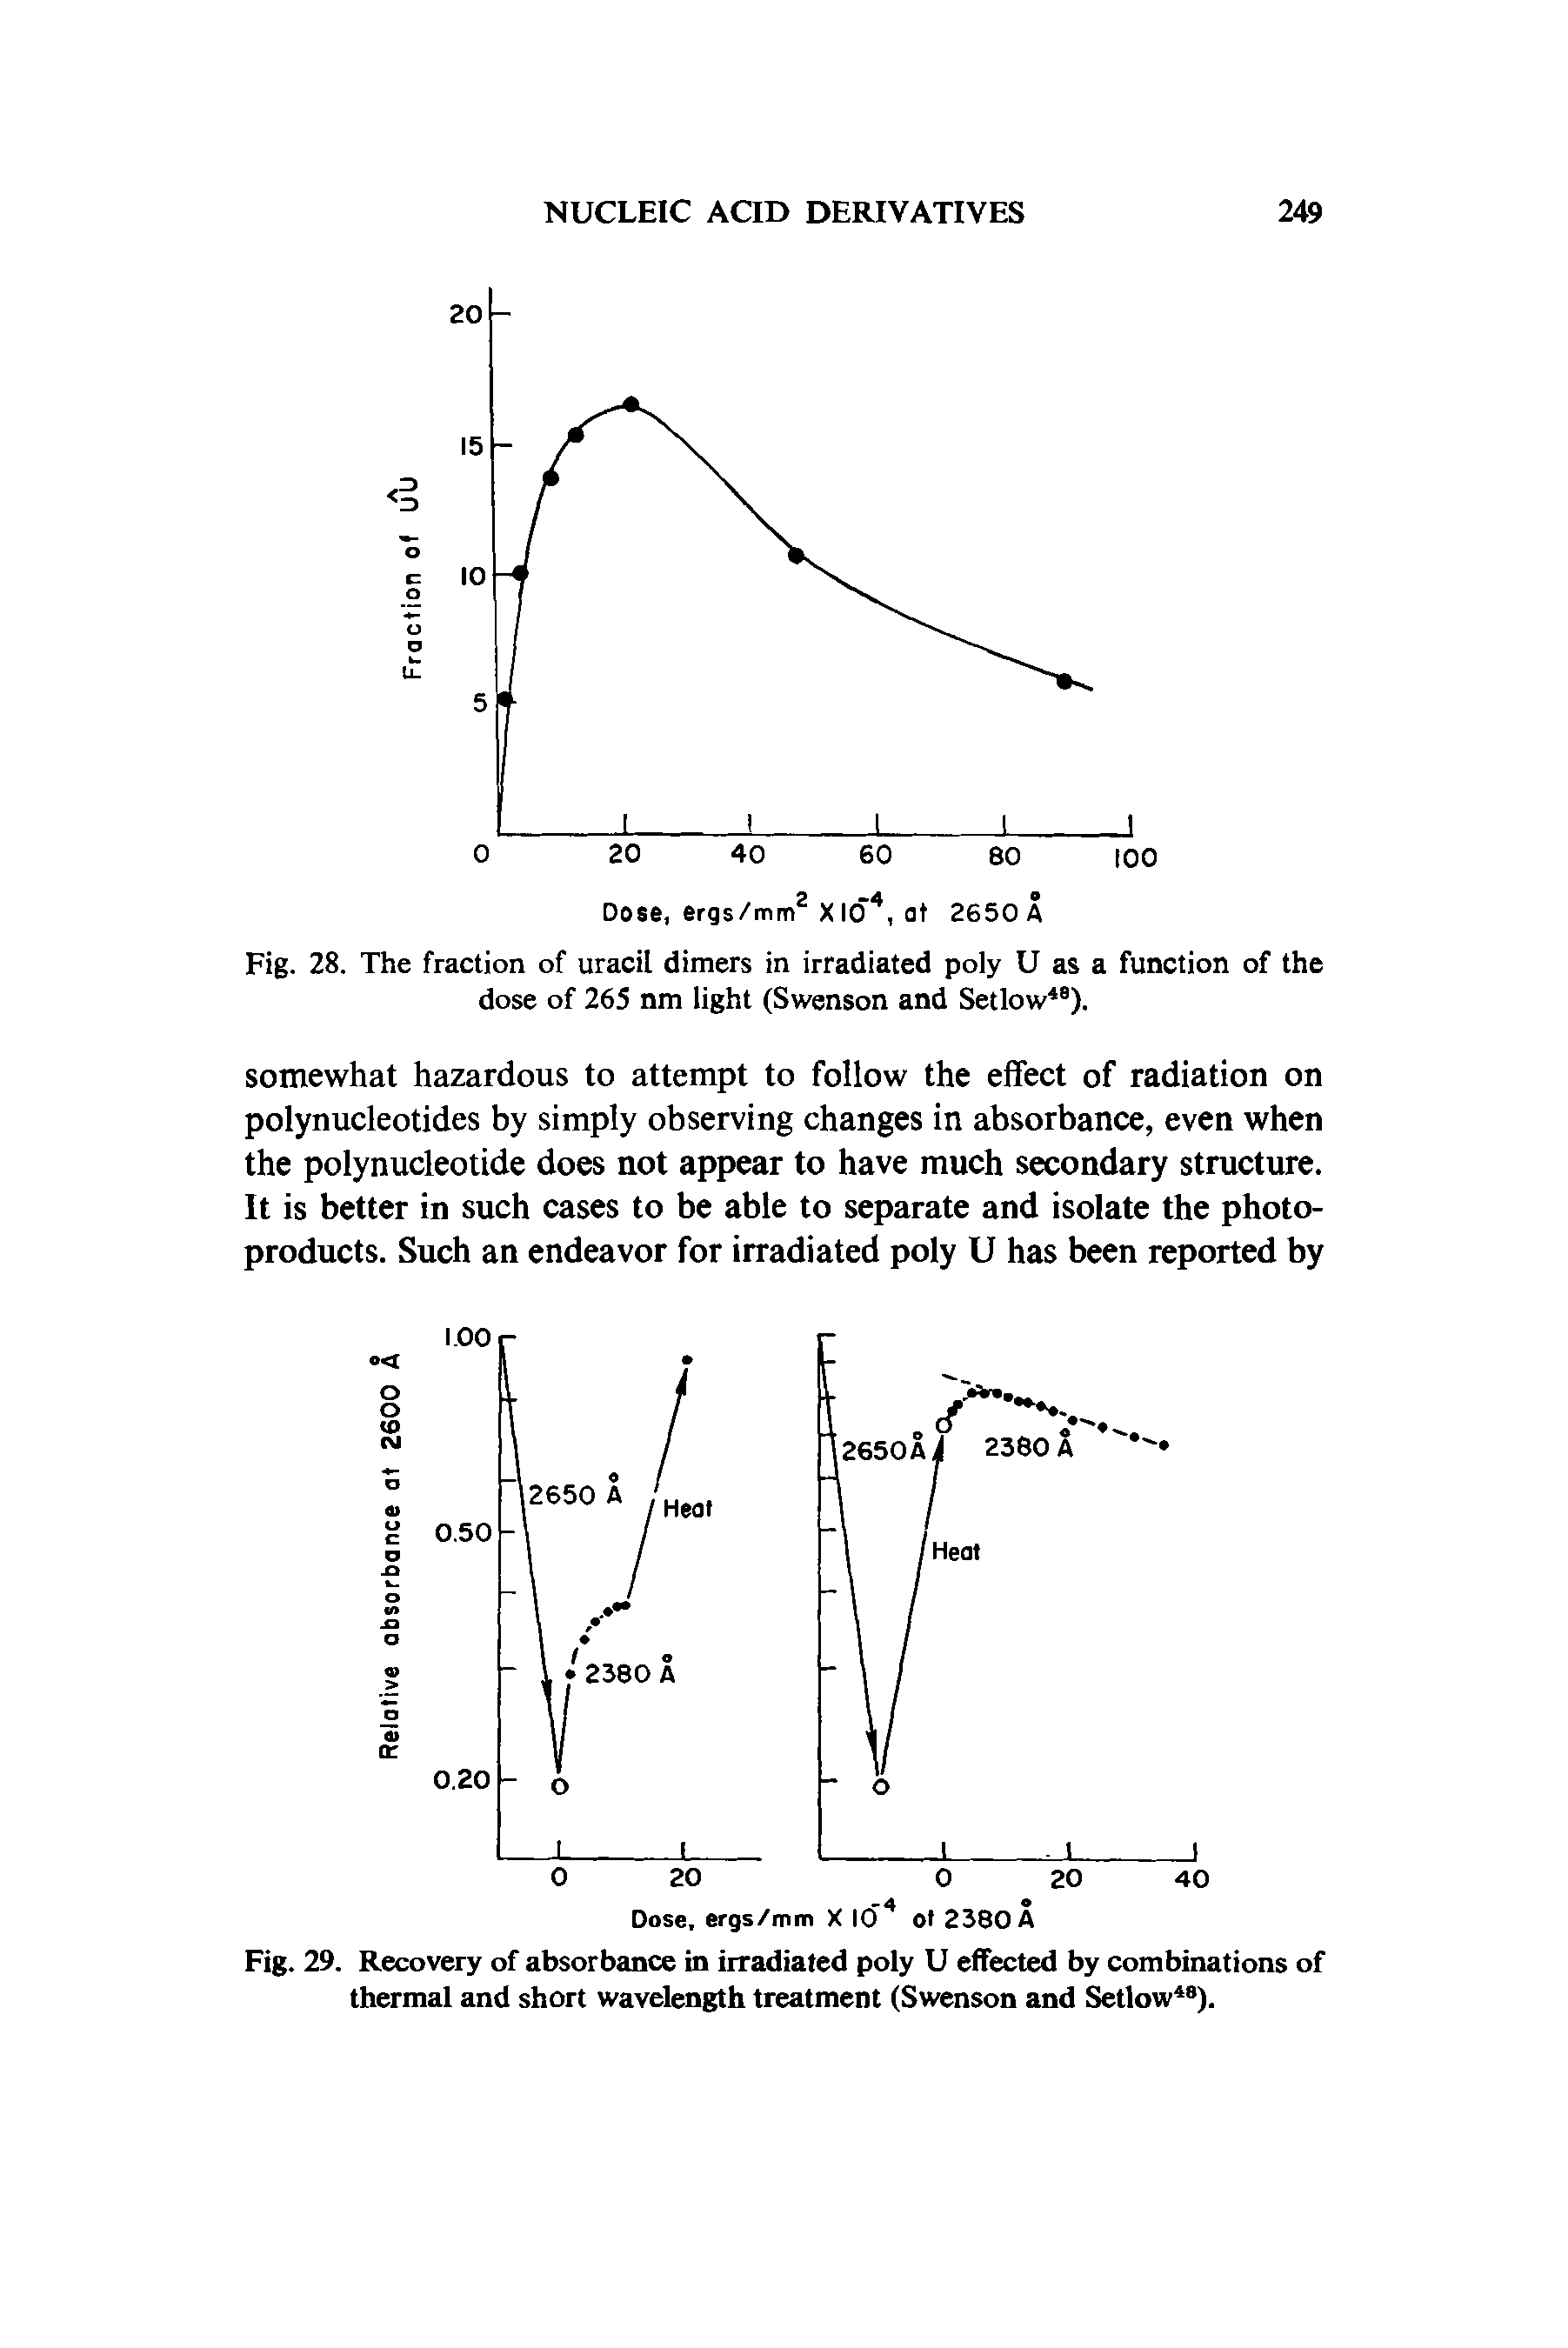 Fig. 29. Recovery of absorbance in irradiated poly U effected by combinations of thermal and short wavelength treatment (Swenson and Setlow48).